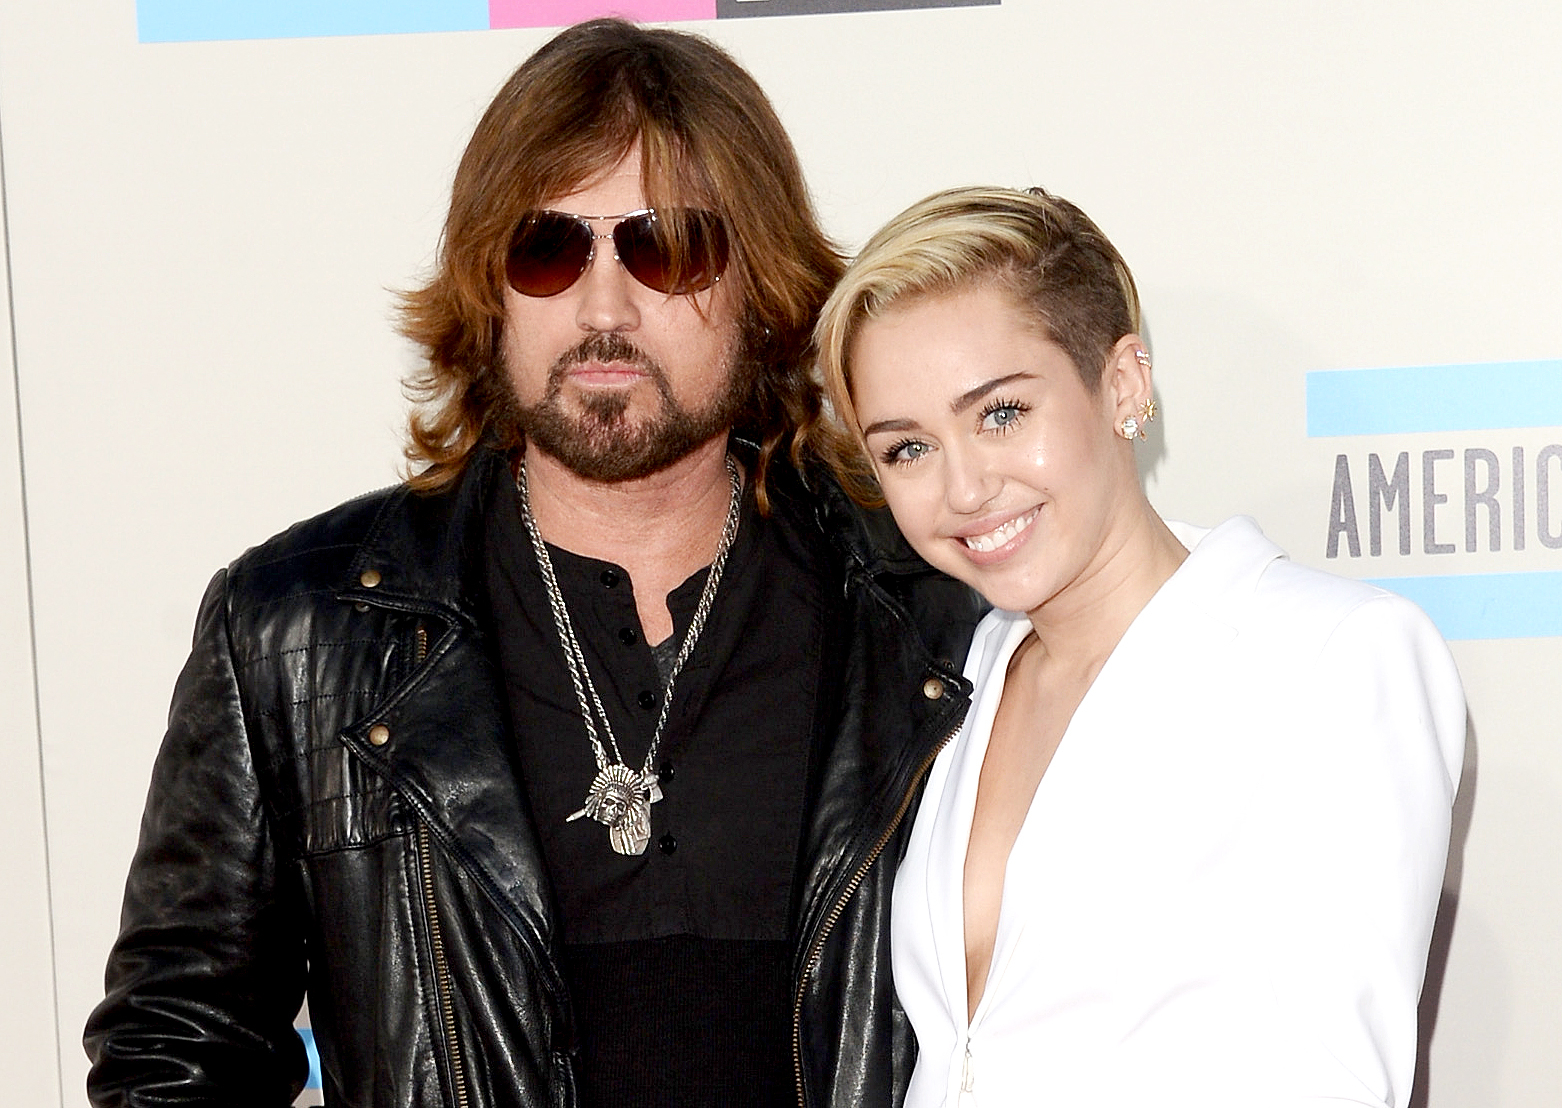 billy ray cyrus discusses miley cyrus' sobriety